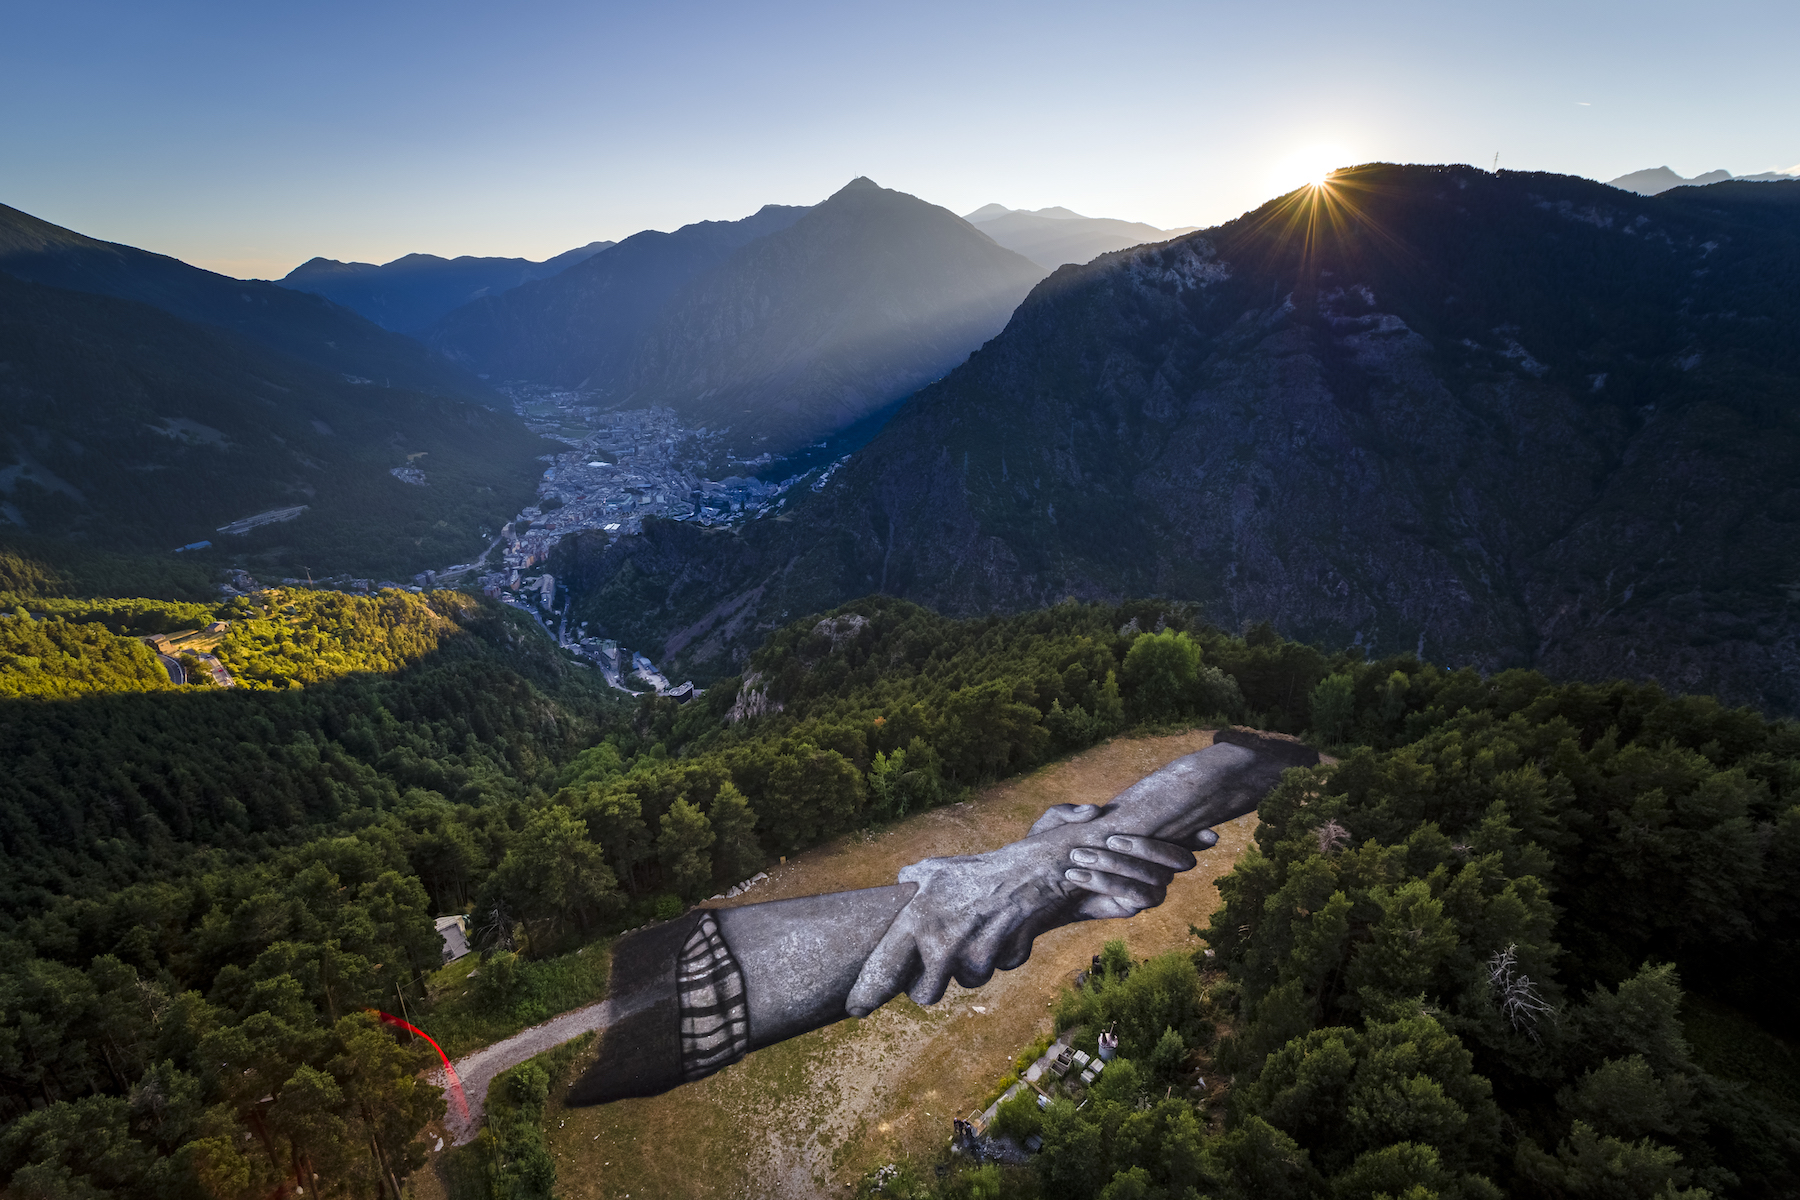 Artist Saype’s Worldwide Symbolic Human Chain extends to Andorra, 2019